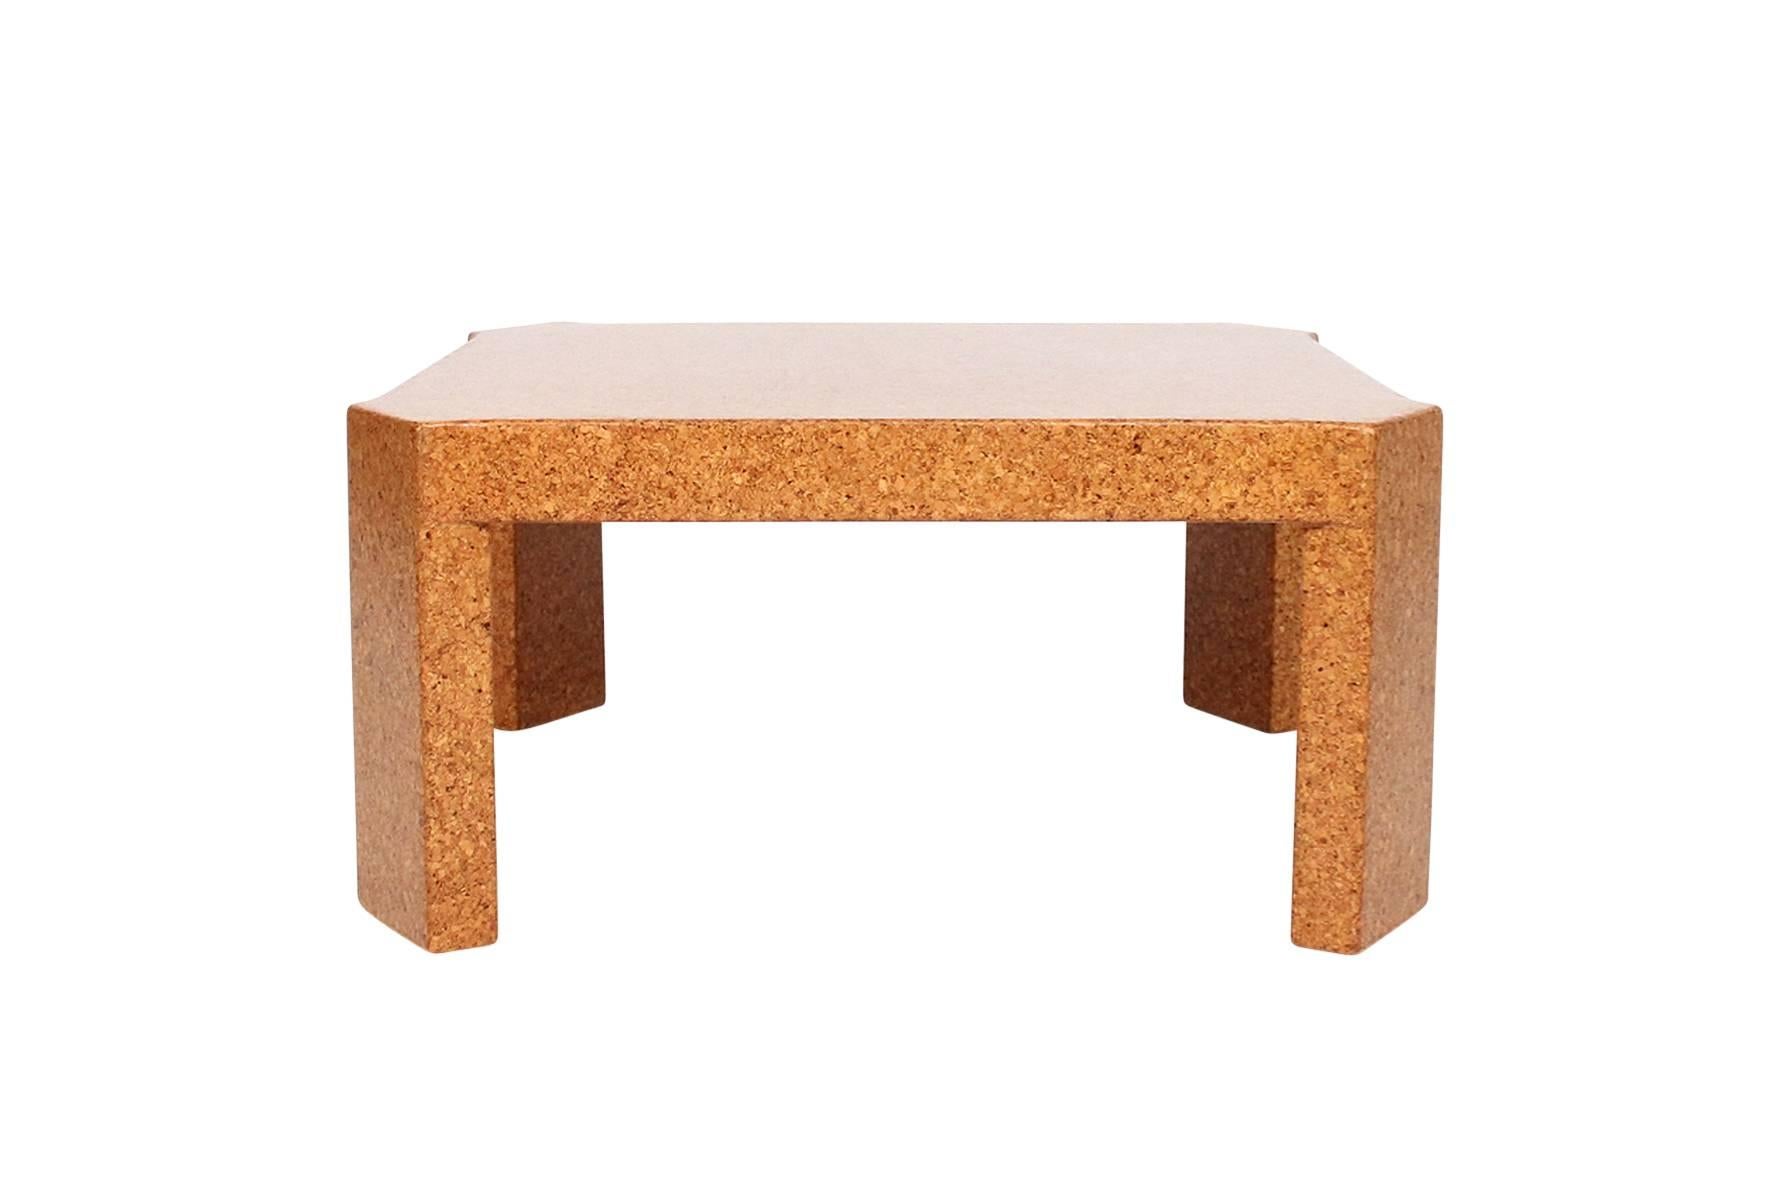 All cork Paul Frankl coffee table.

Unusual and rare form. Restored.